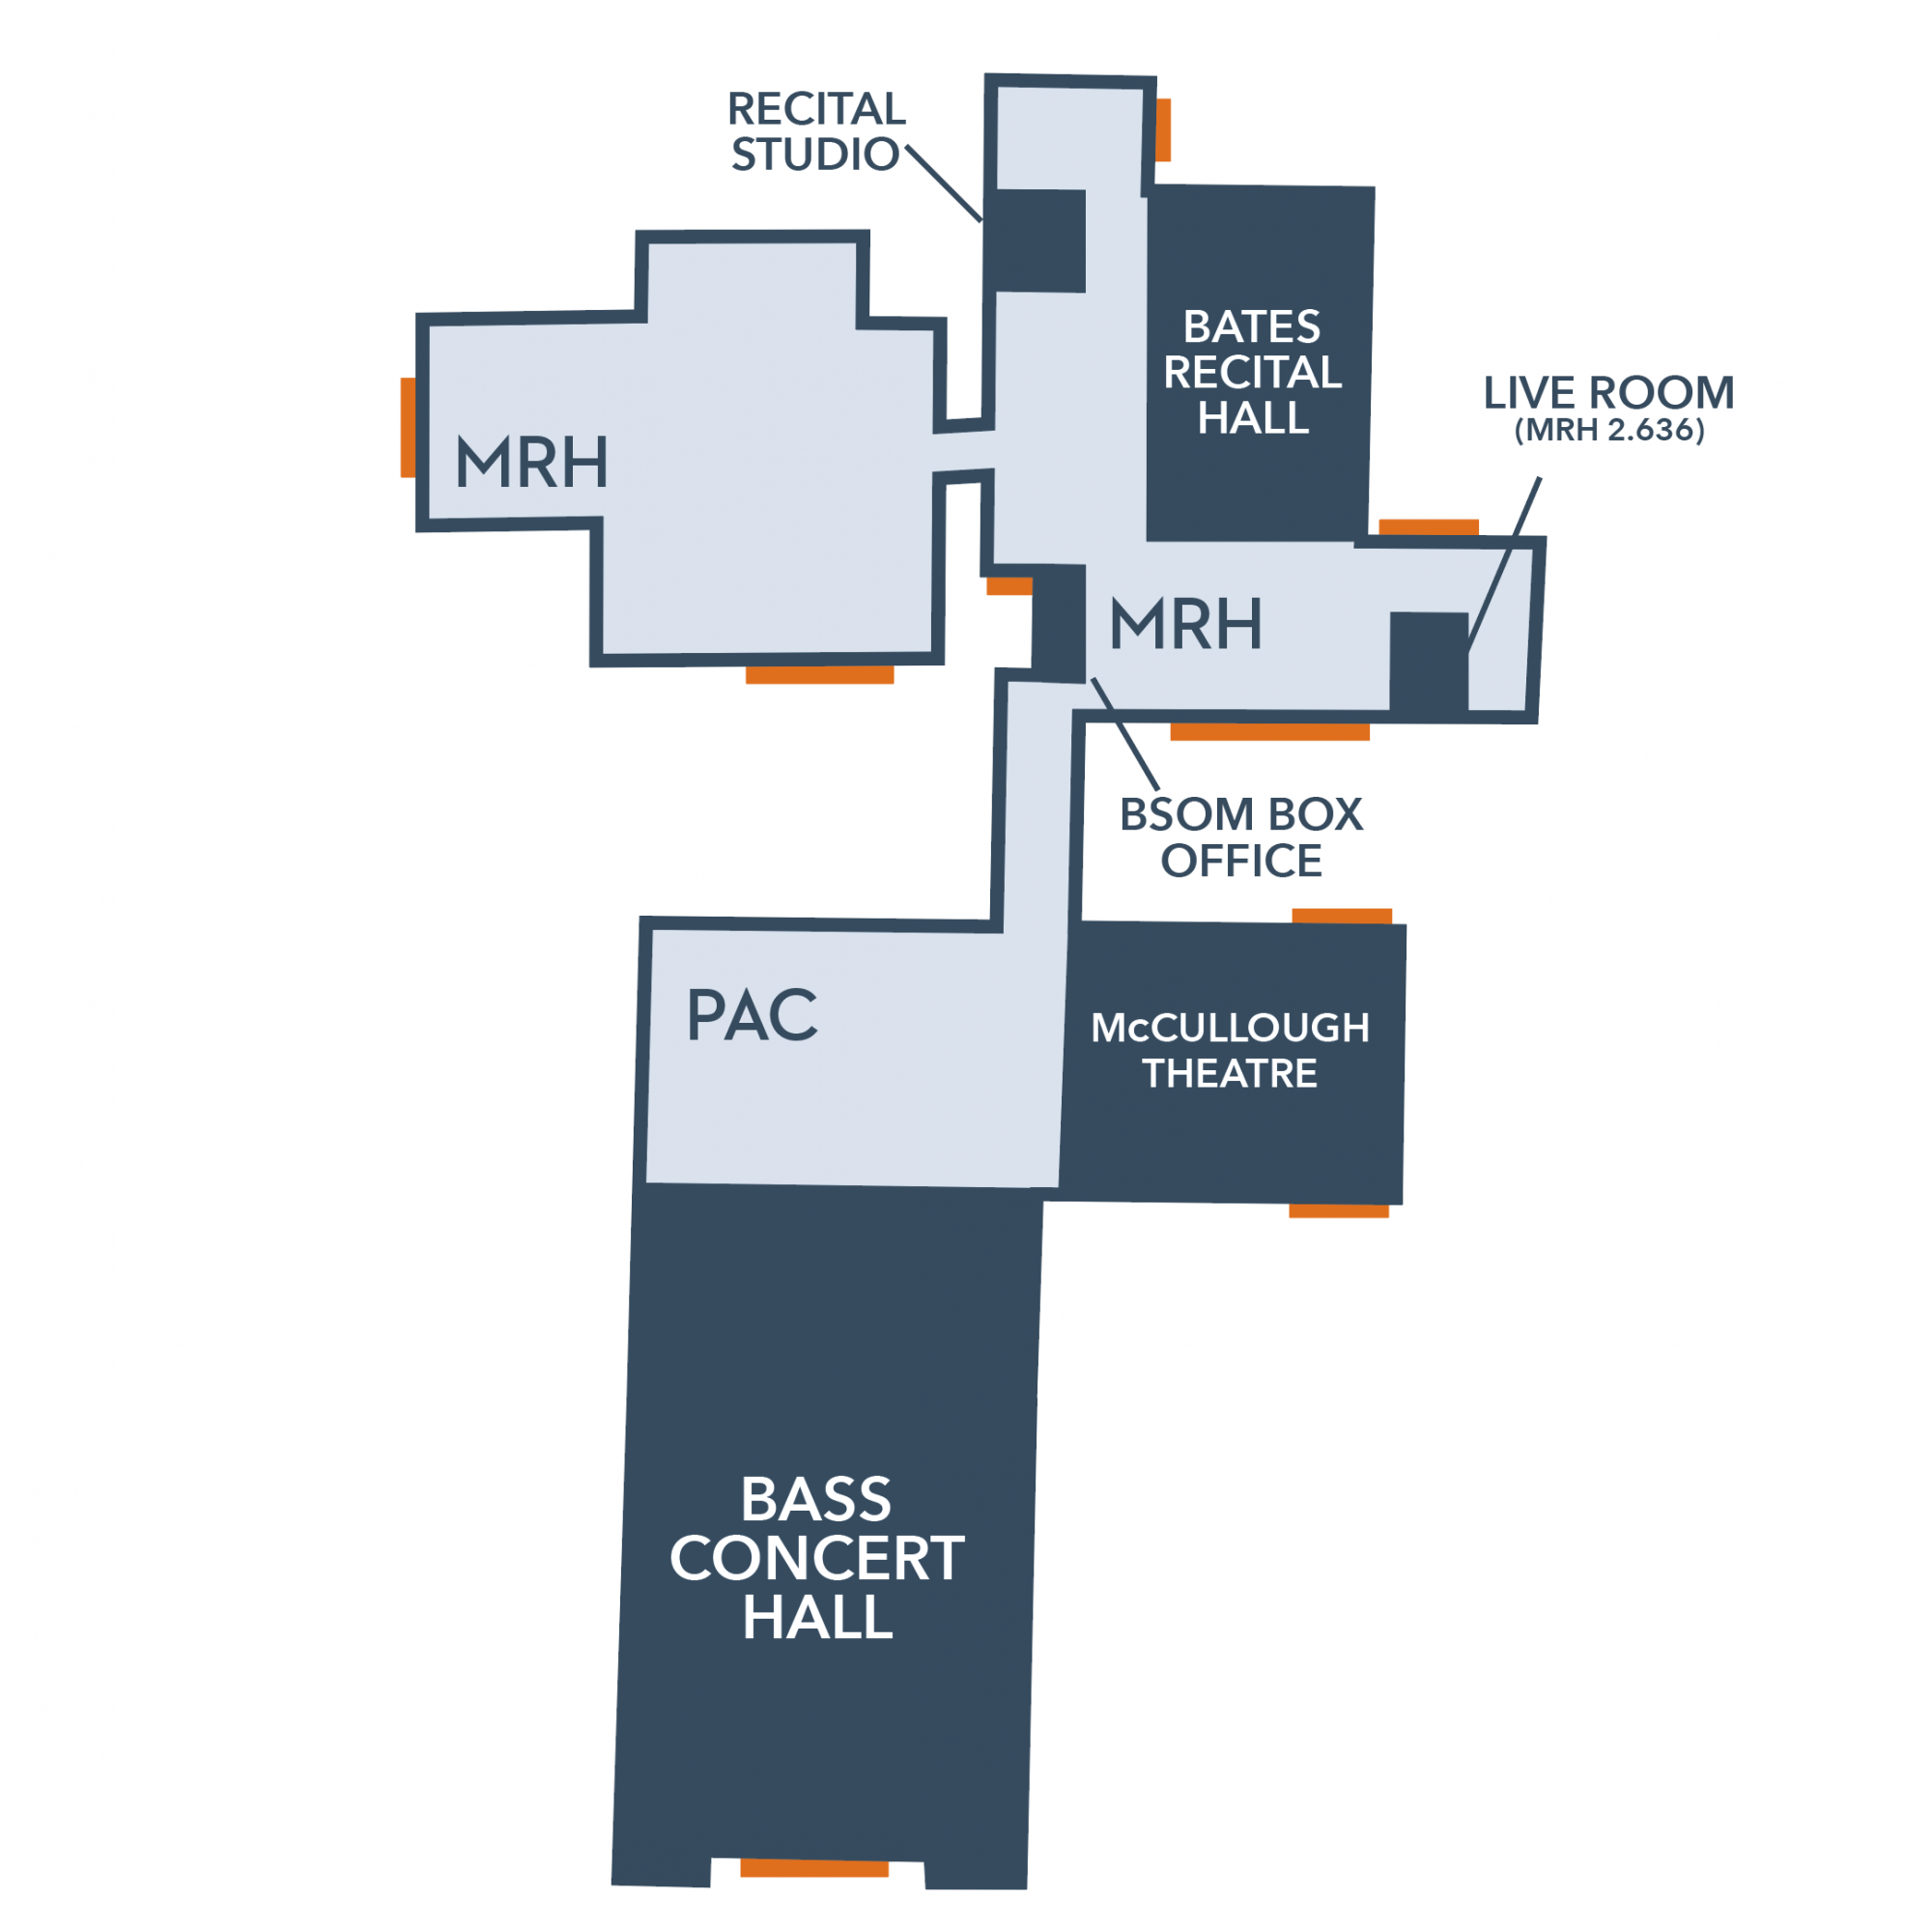 A Map of performance halls in the MRH Building